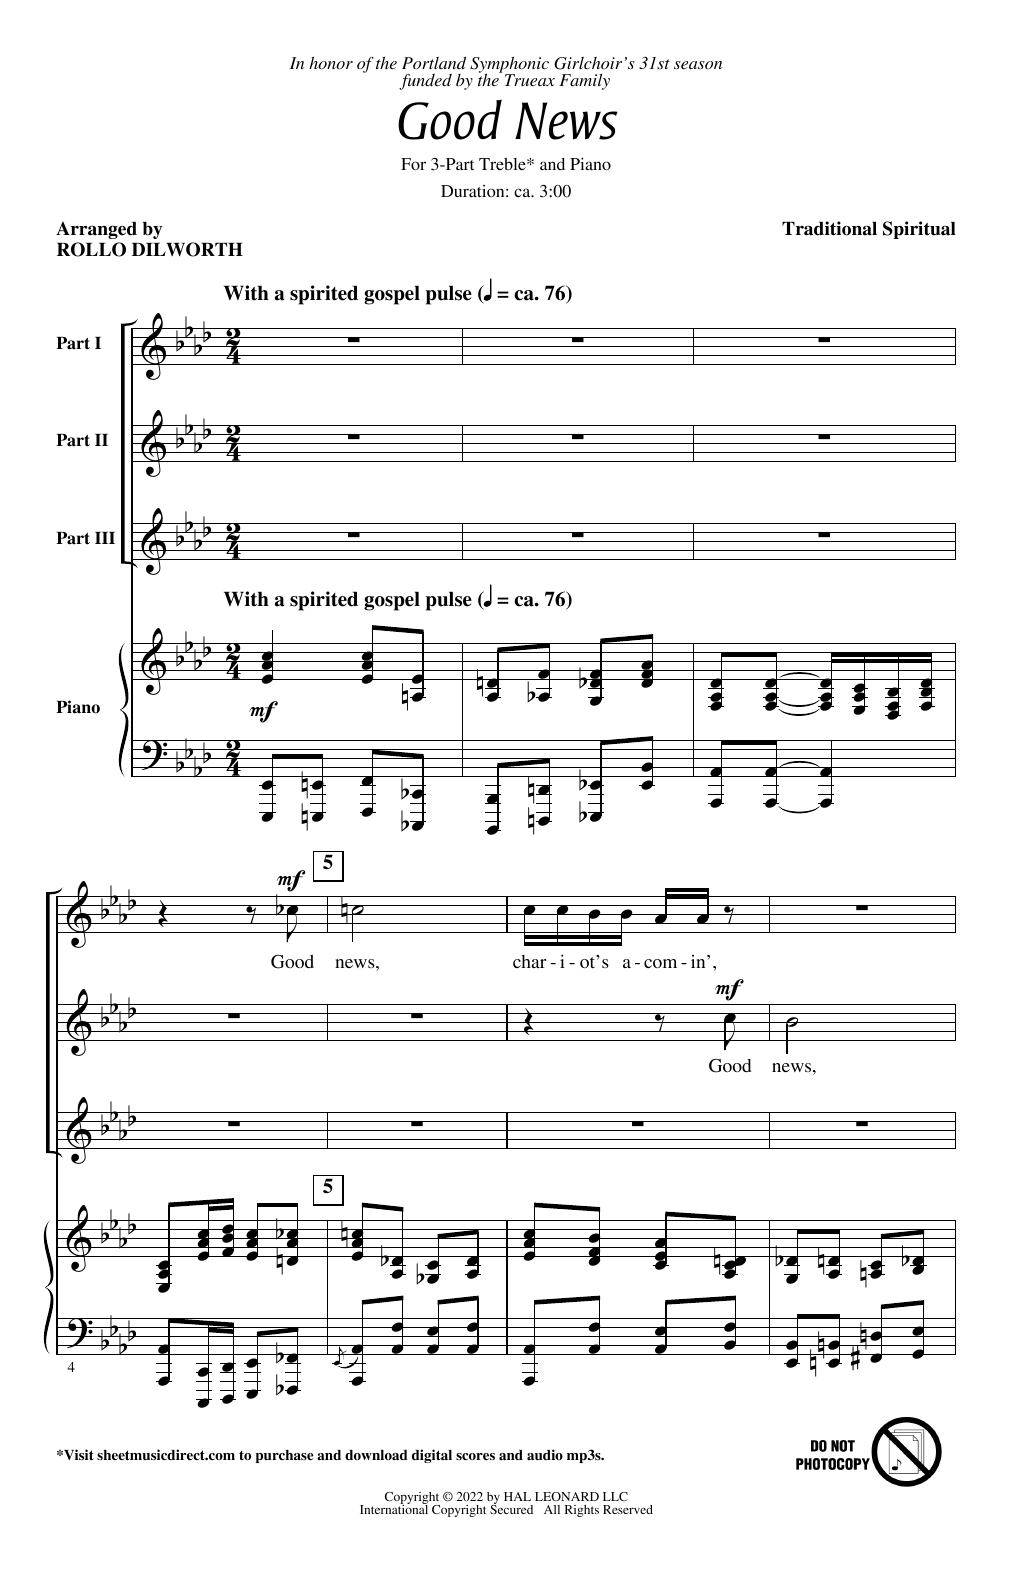 Download Traditional Spiritual Good News (arr. Rollo Dilworth) Sheet Music